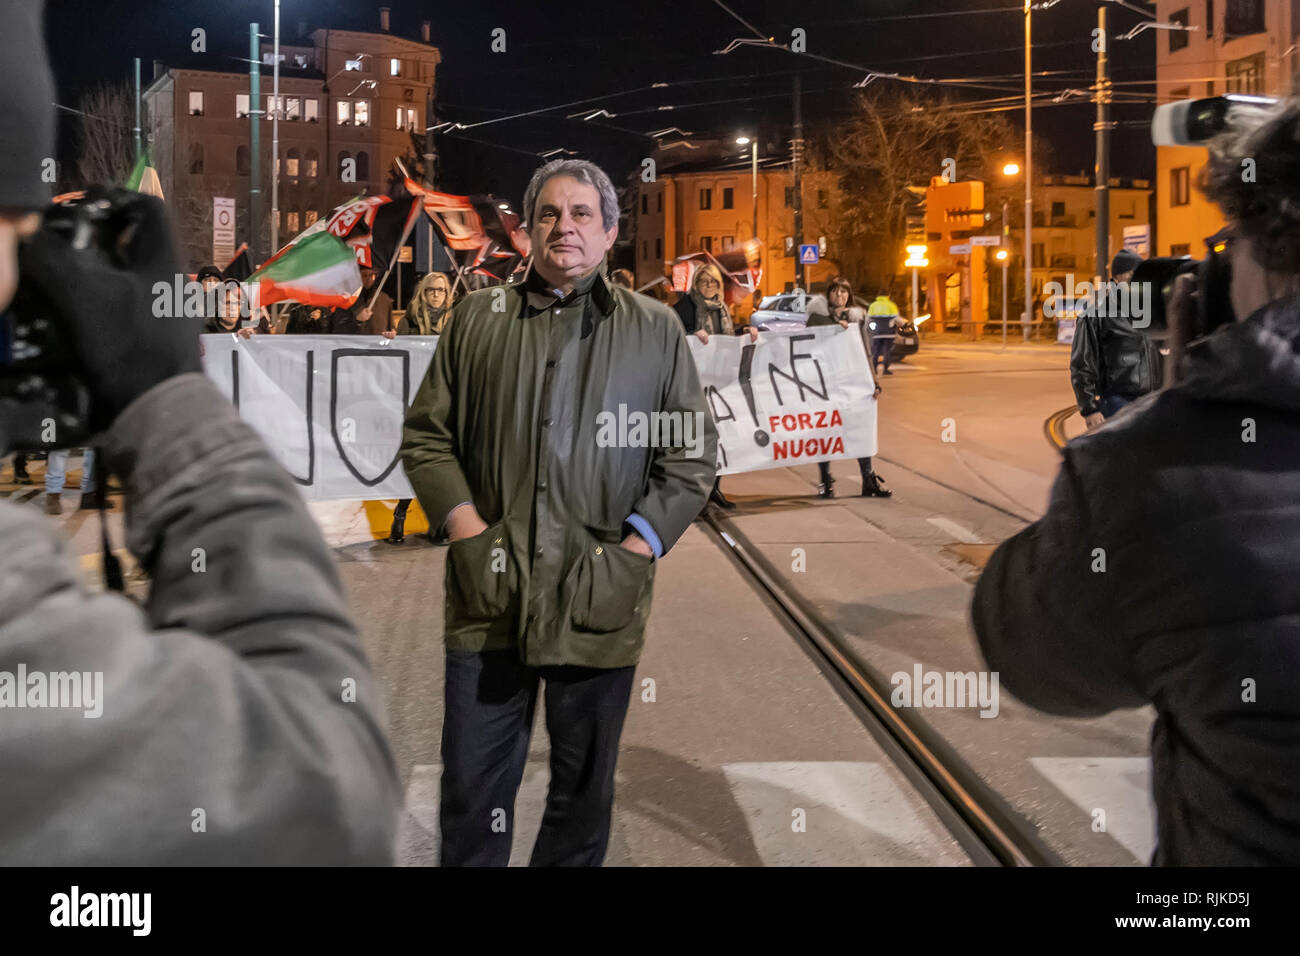 Mestre, Italy. 06th Feb, 2019. Protest of 'Forza Nuova' against 'Centri Sociali' and drug dealing in Mestre, Italy. Credit: Stefano Mazzola/Awakening/Alamy Live News Stock Photo